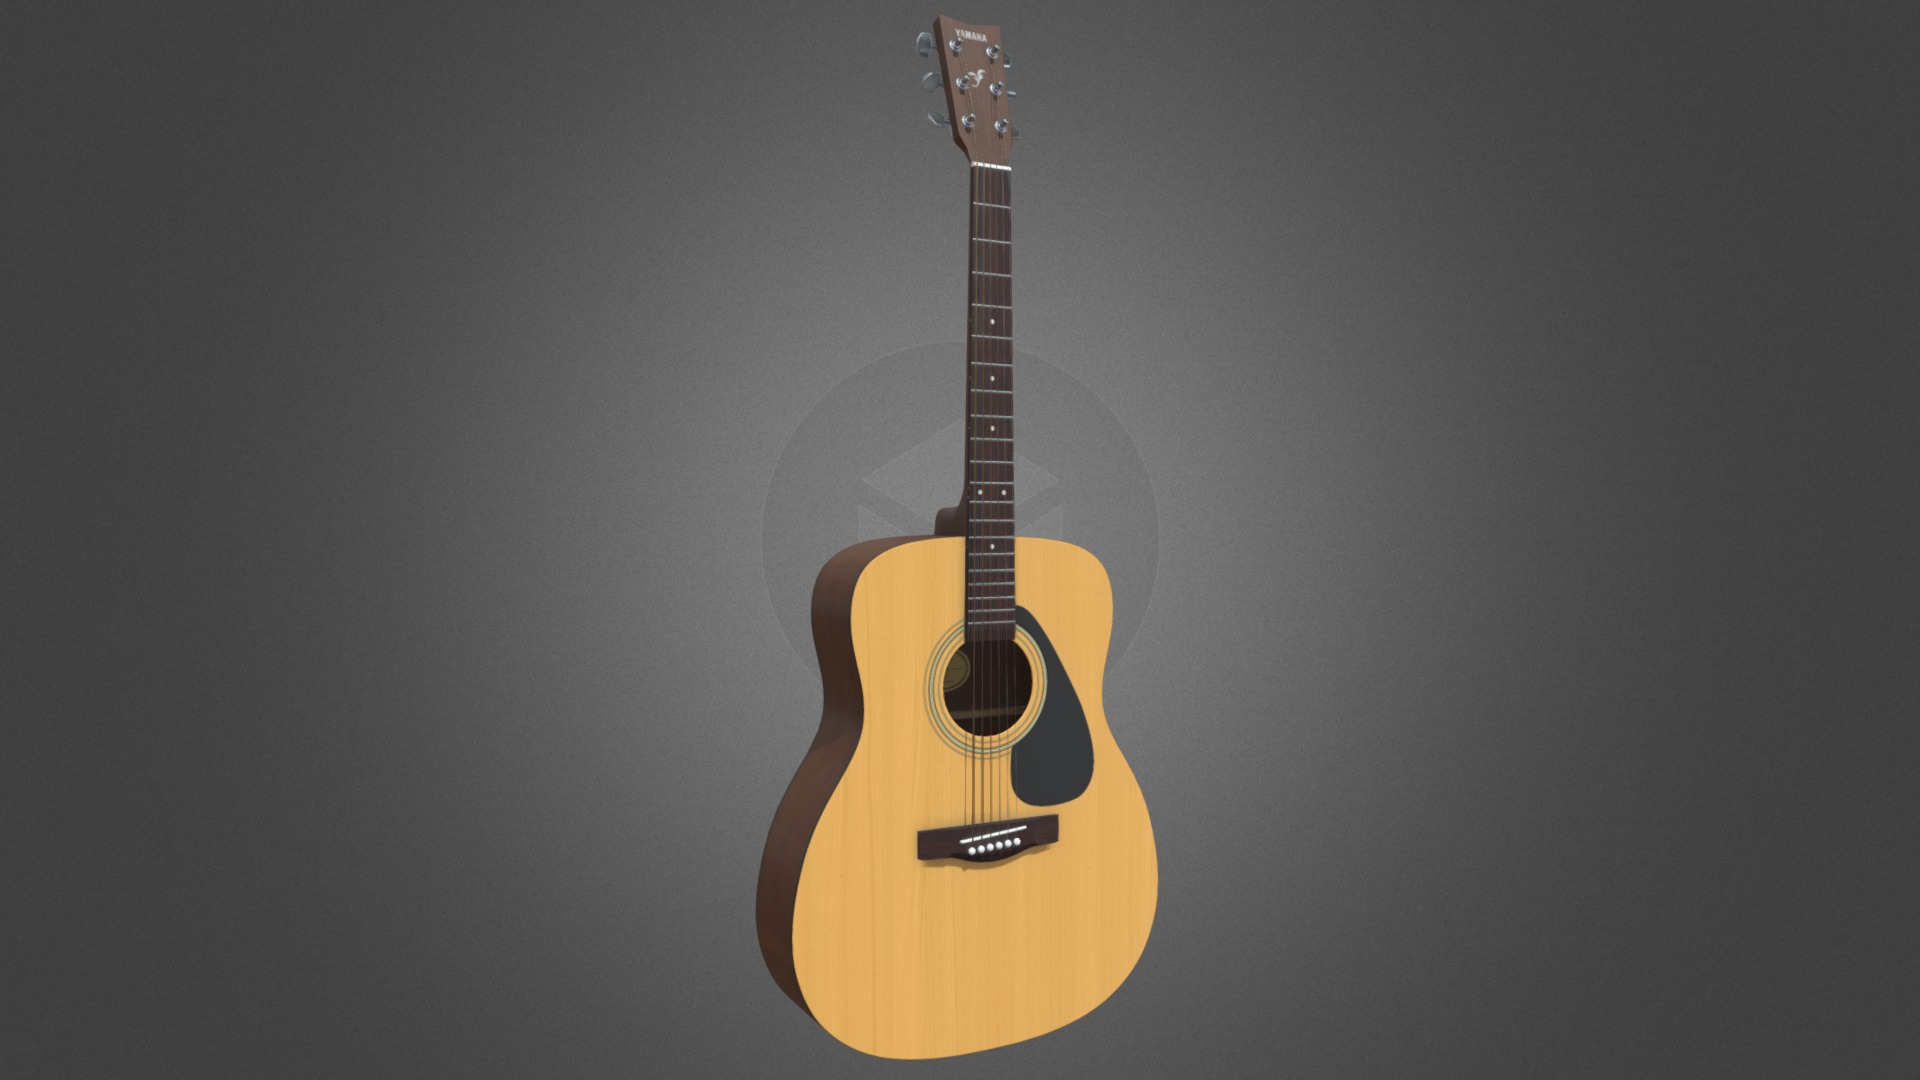 3D model Yamaha F310 Acoustic Guitar Lowpoly - This is a 3D model of the Yamaha F310 Acoustic Guitar Lowpoly. The 3D model is about a guitar on a wall.